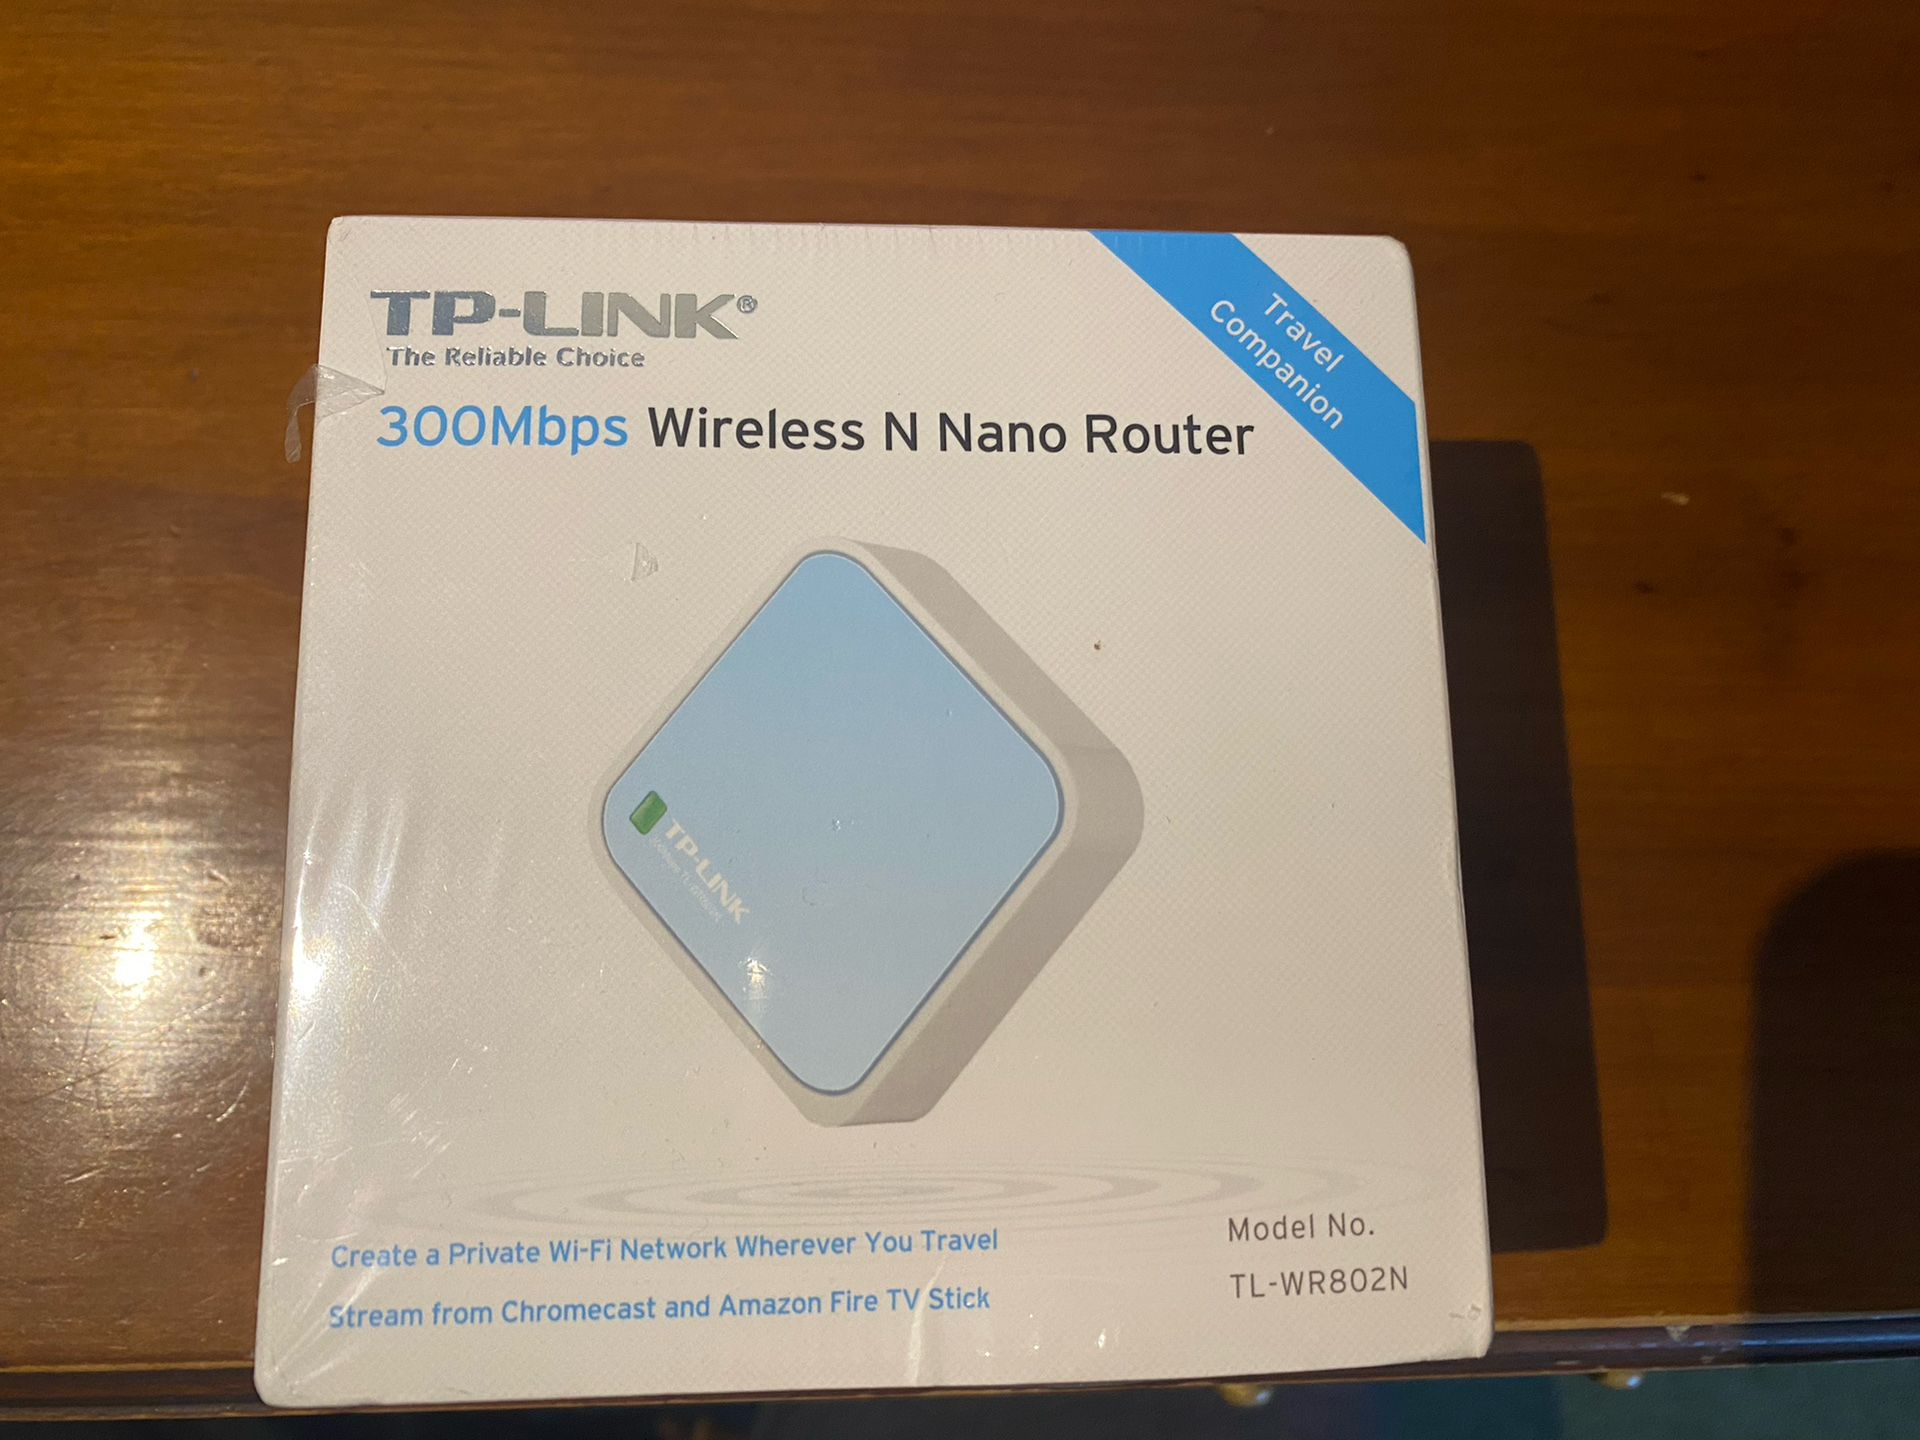 TP-Link 300 Mbps Wireless N Nano Router